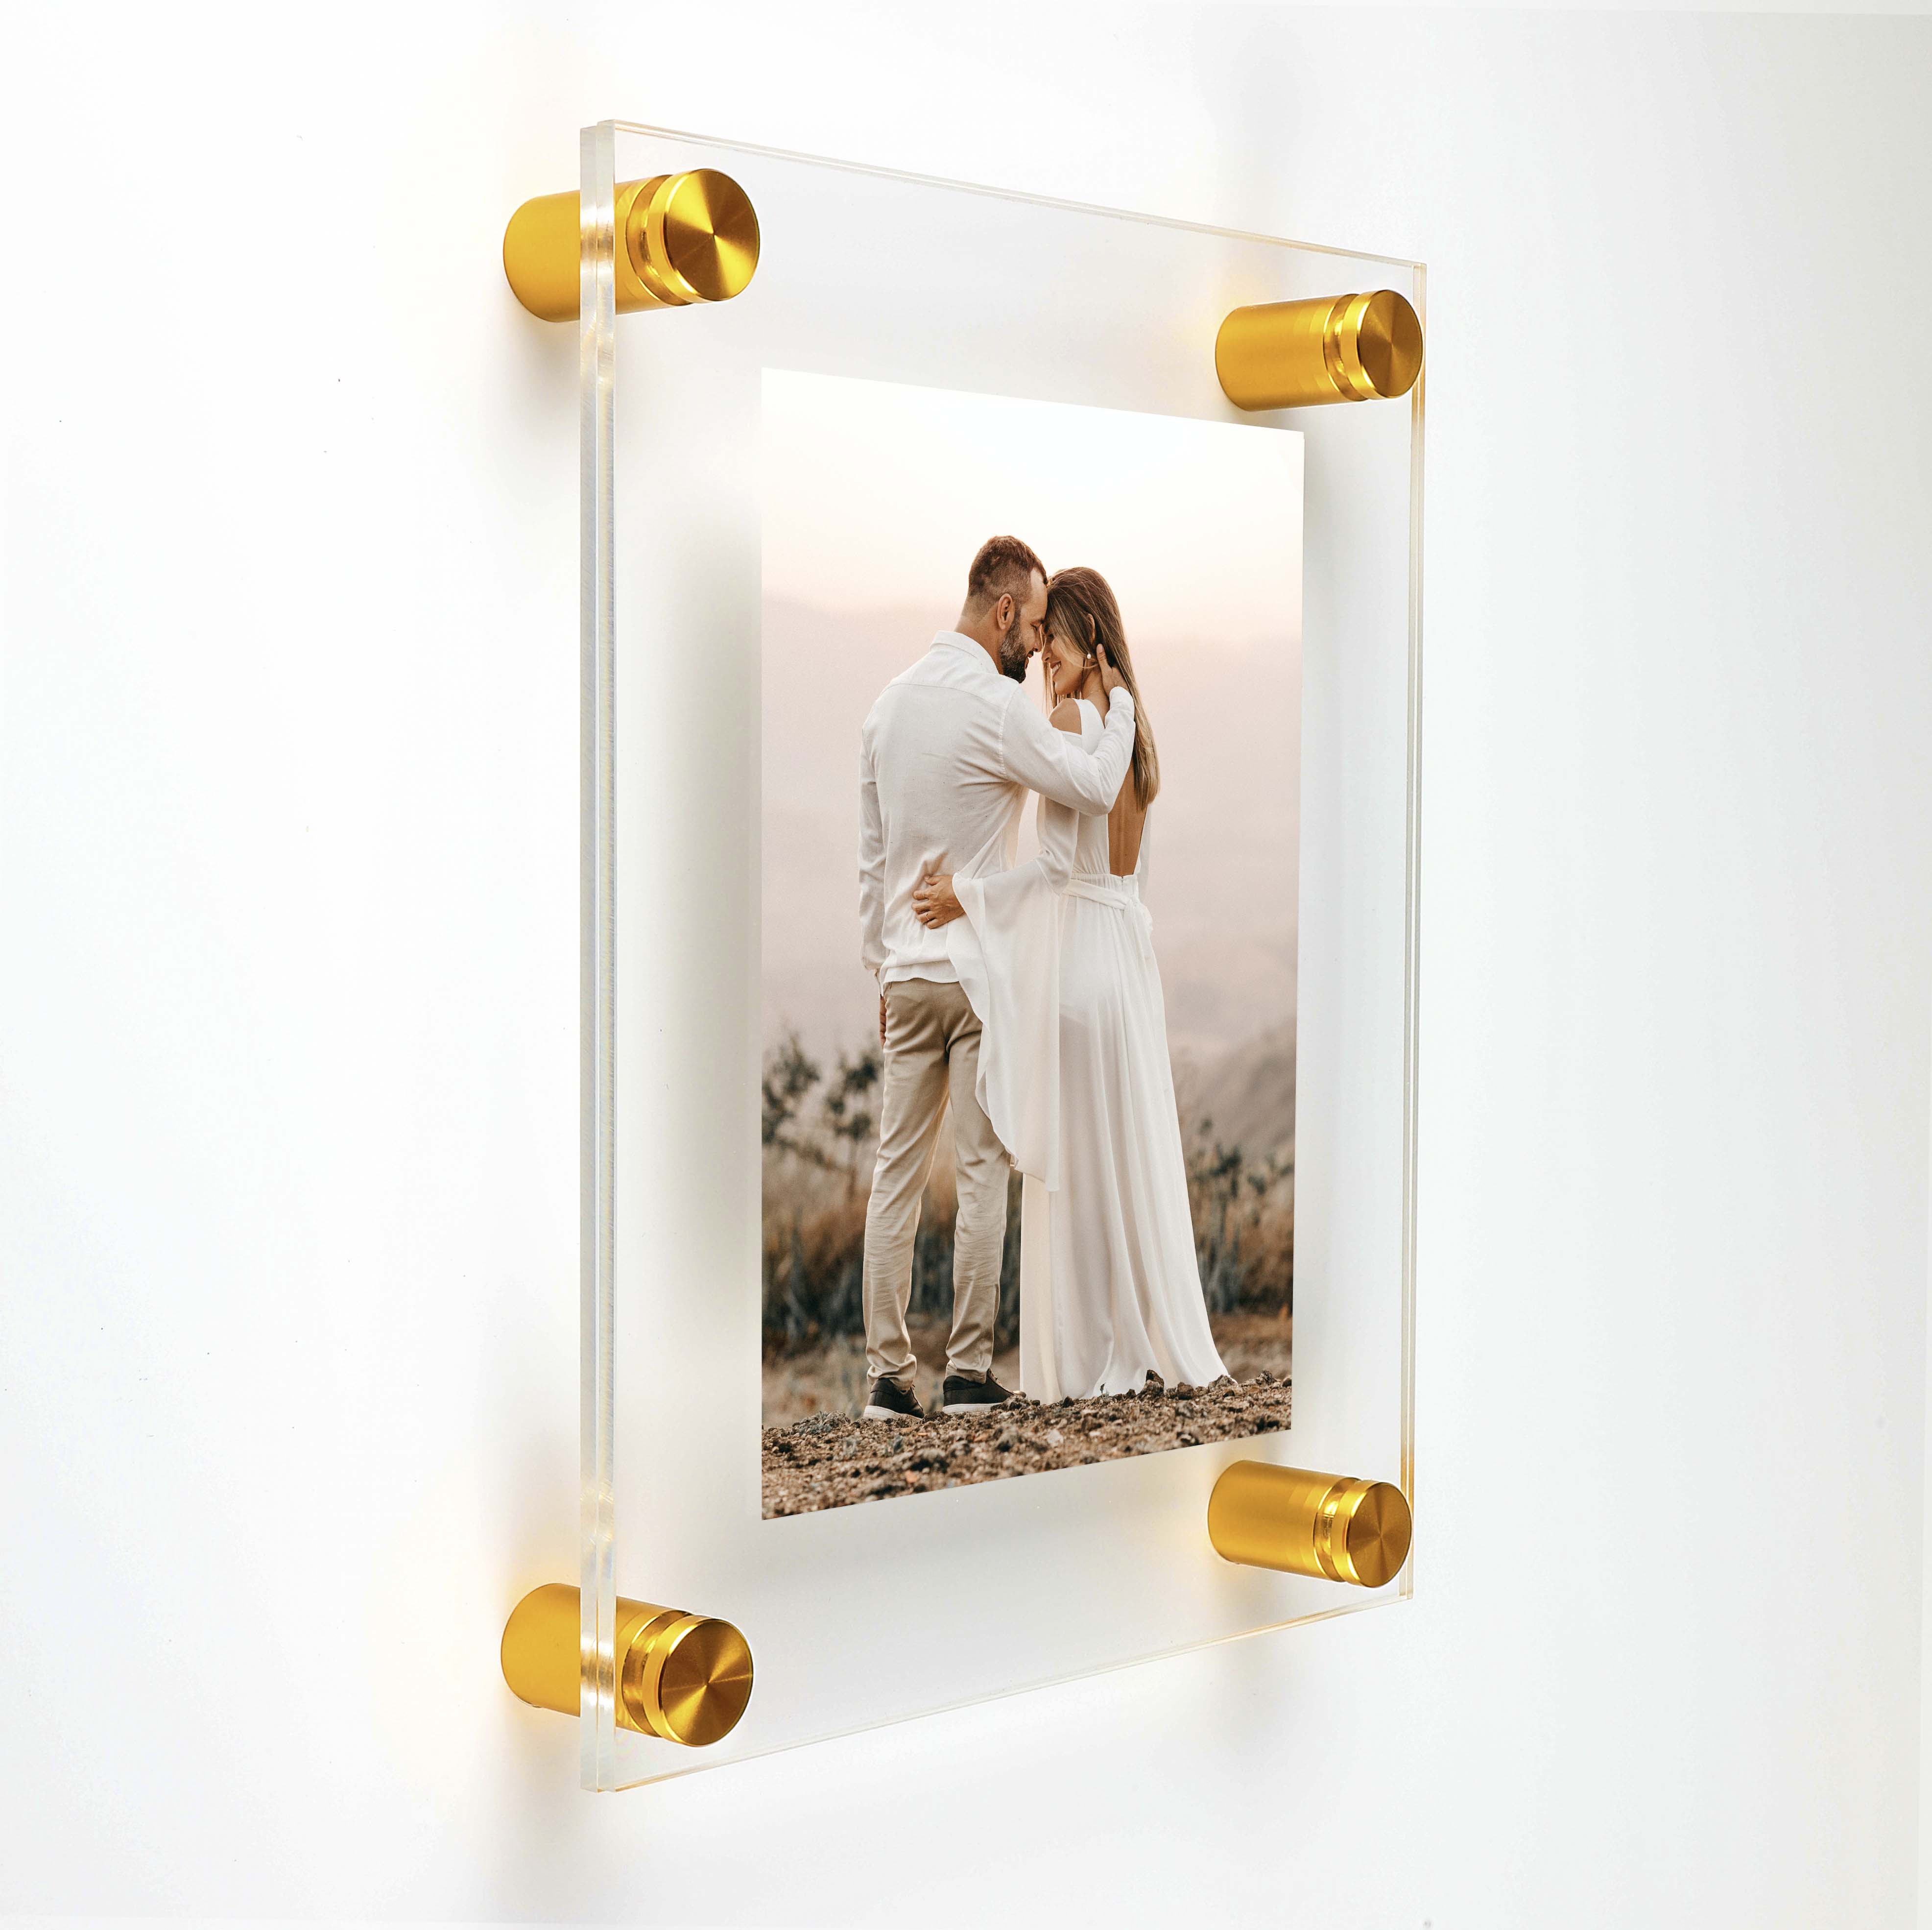 (2) 19-3/4'' x 26'' Clear Acrylics , Pre-Drilled With Polished Edges (Thick 3/16'' each), Wall Frame with (4) 5/8'' x 1'' Gold Anodized Aluminum Standoffs includes Screws and Anchors